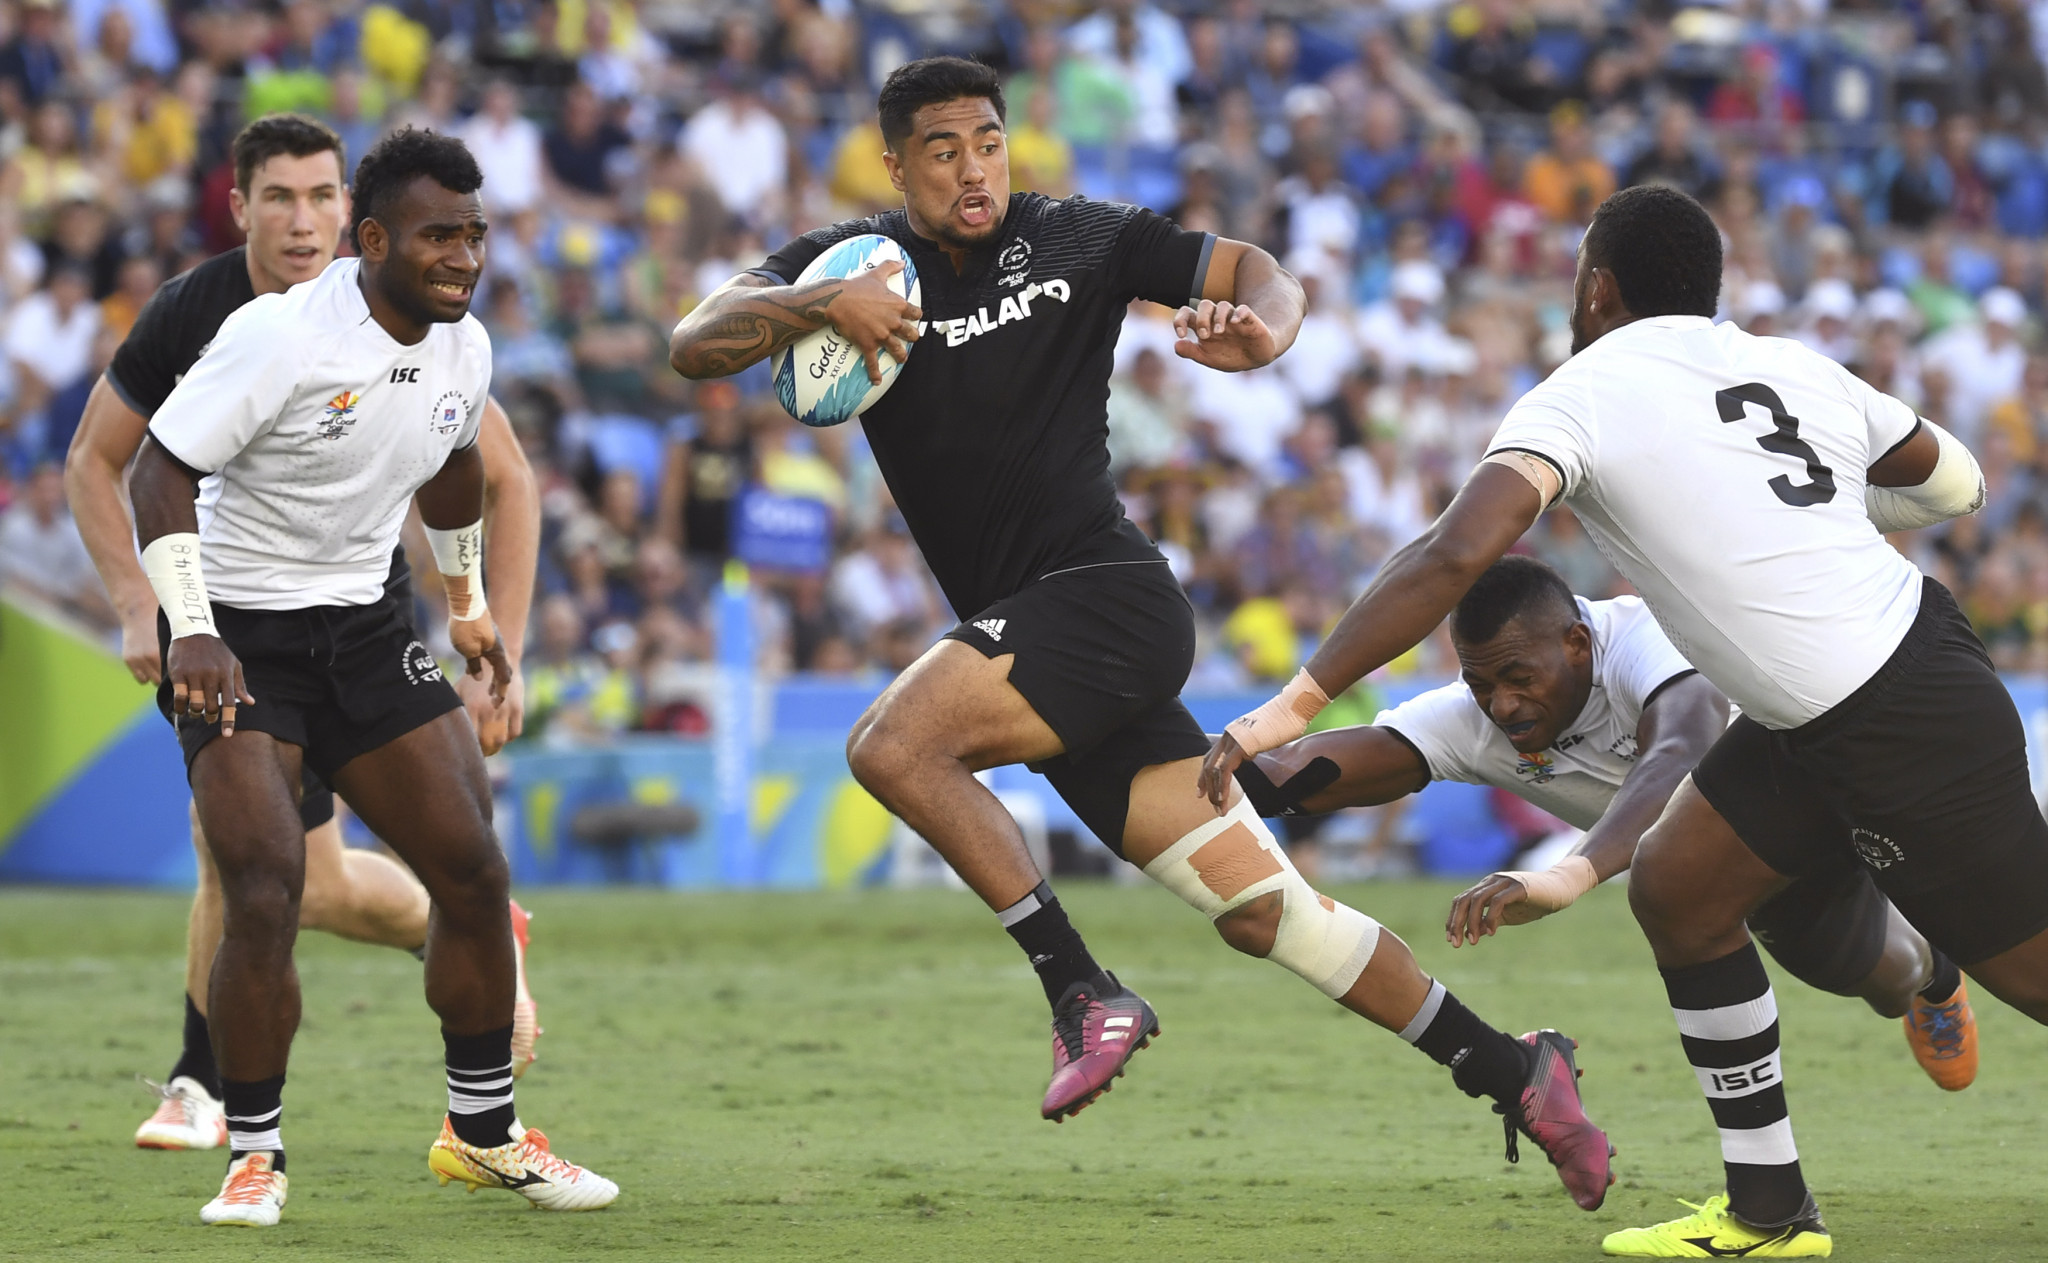 New Zealand held off Fiji to win the men's tournament and conclude sporting action at the Games ©Getty Images